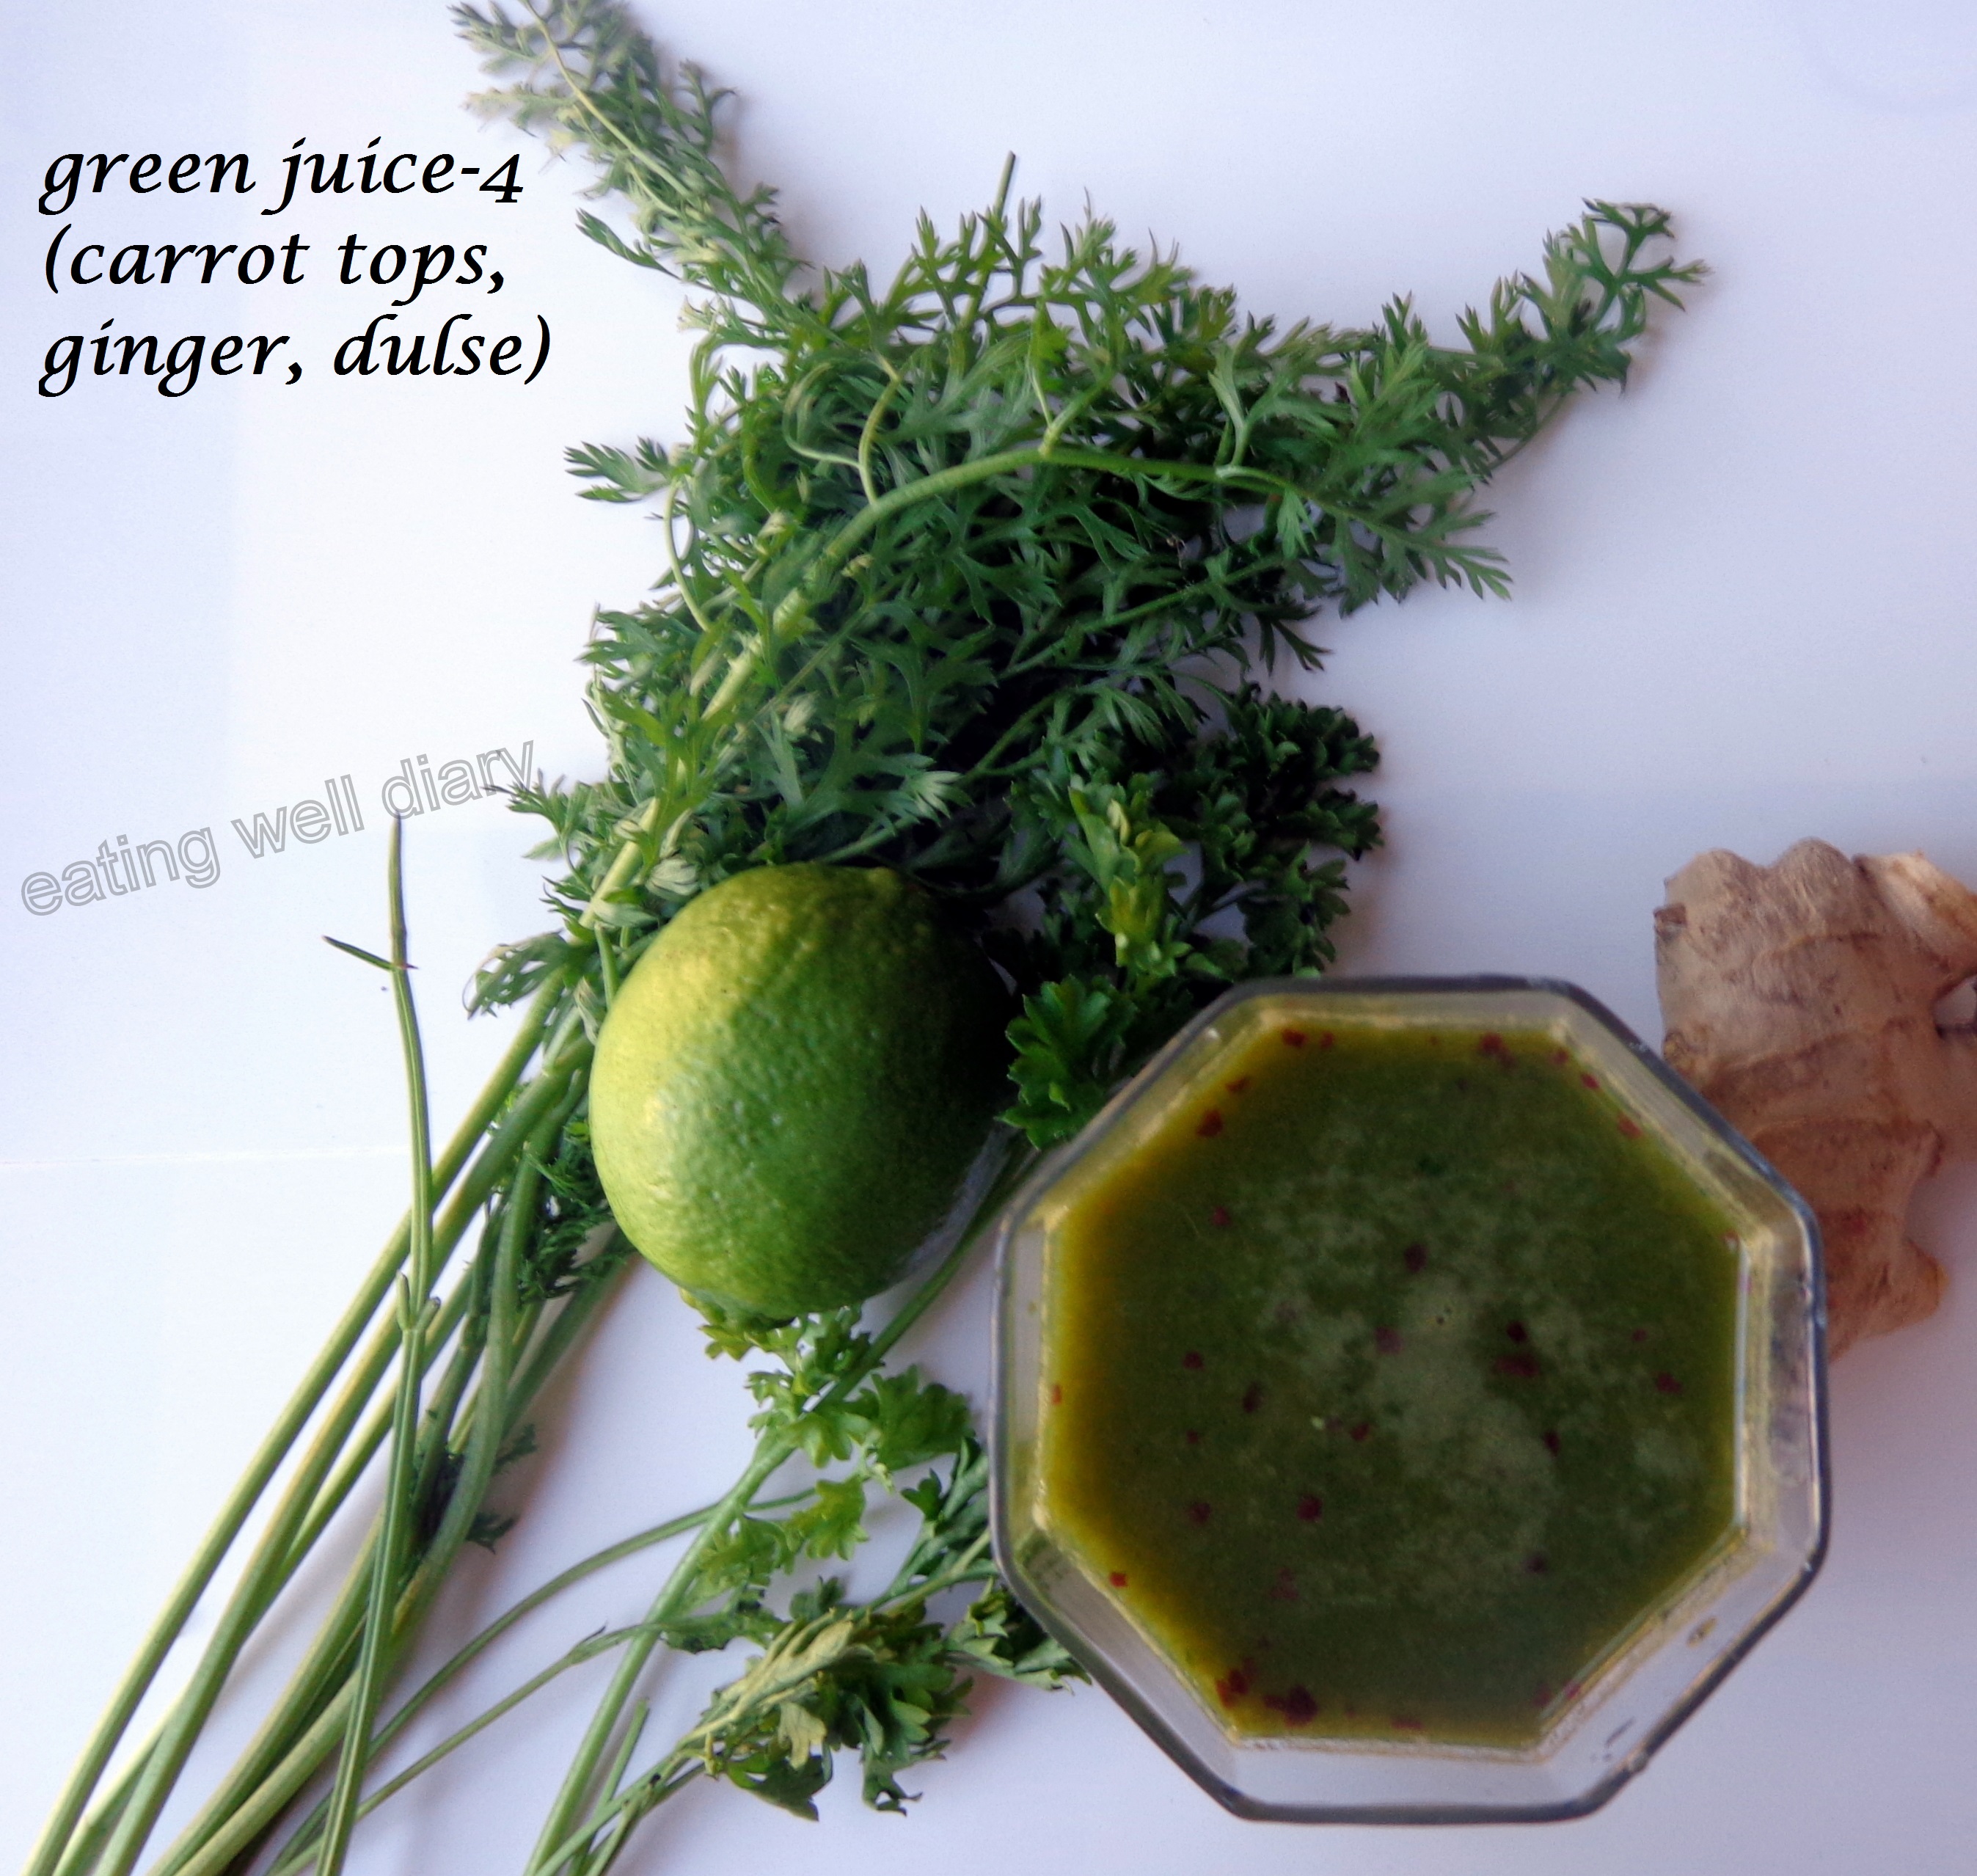 Green juice with carrot tops, ginger and dulse flakes